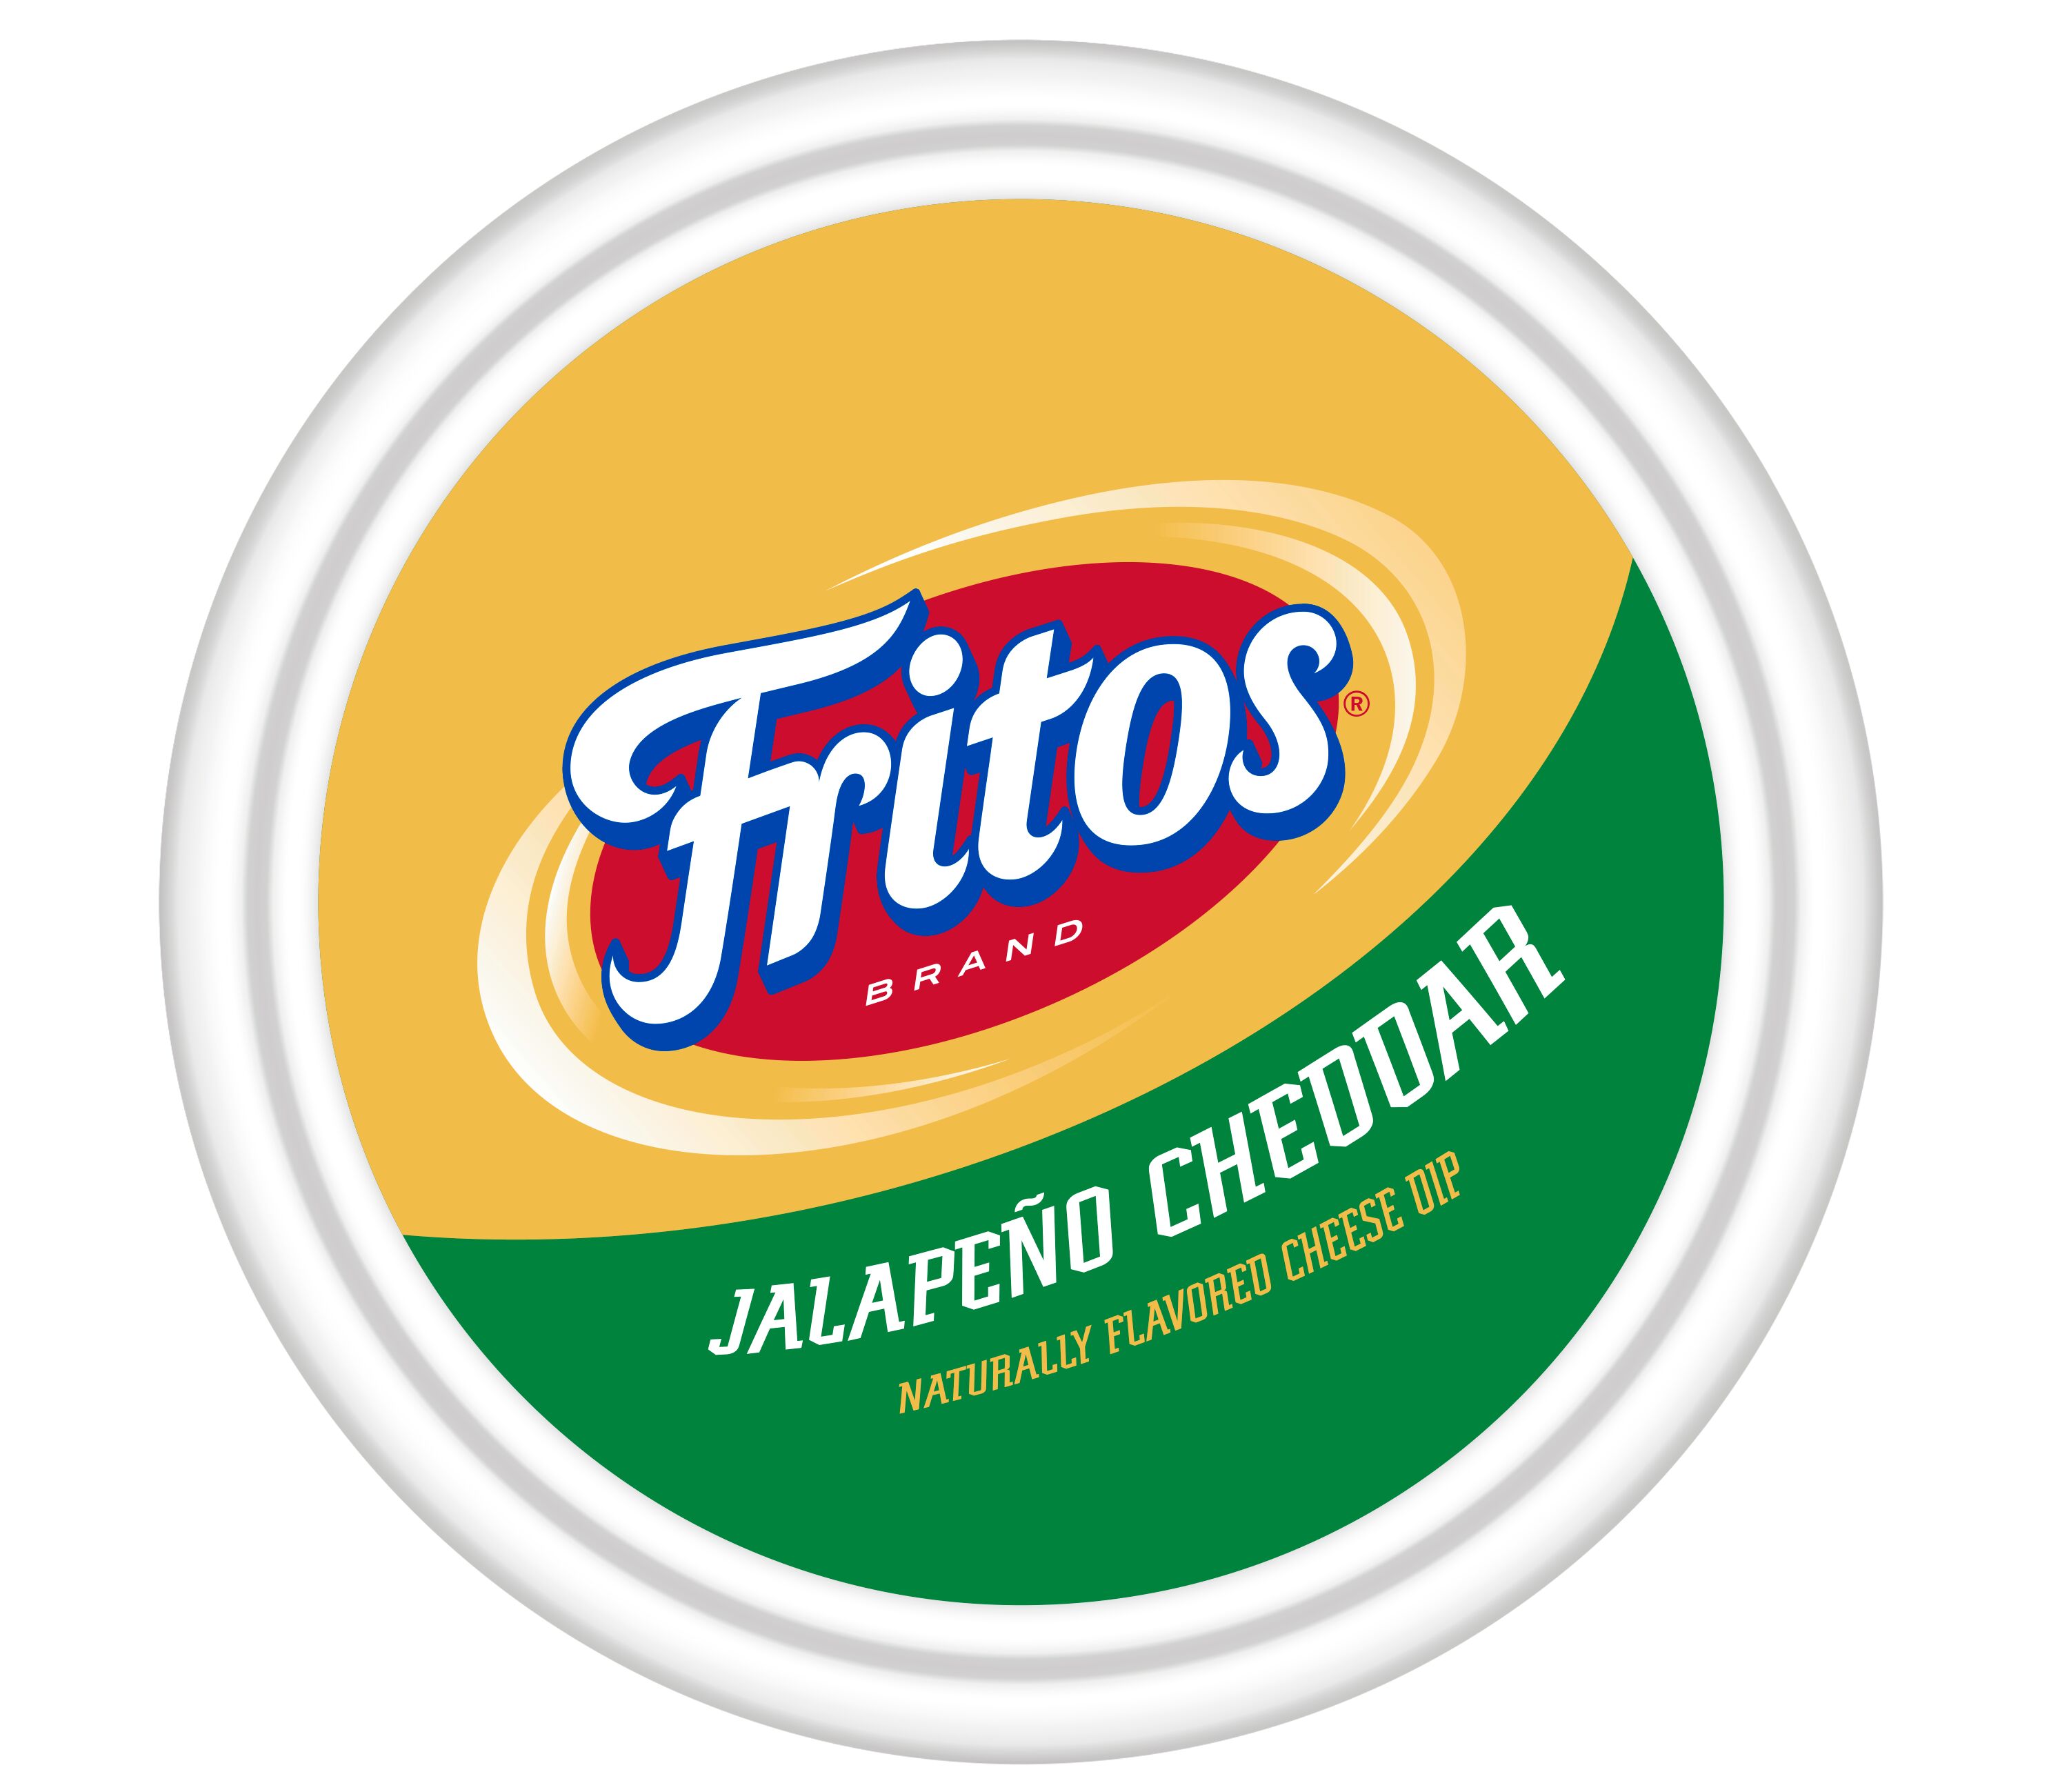 Fritos Jalapeno Cheddar Naturally Flavored Cheese Dip, Can 9 oz - image 2 of 6